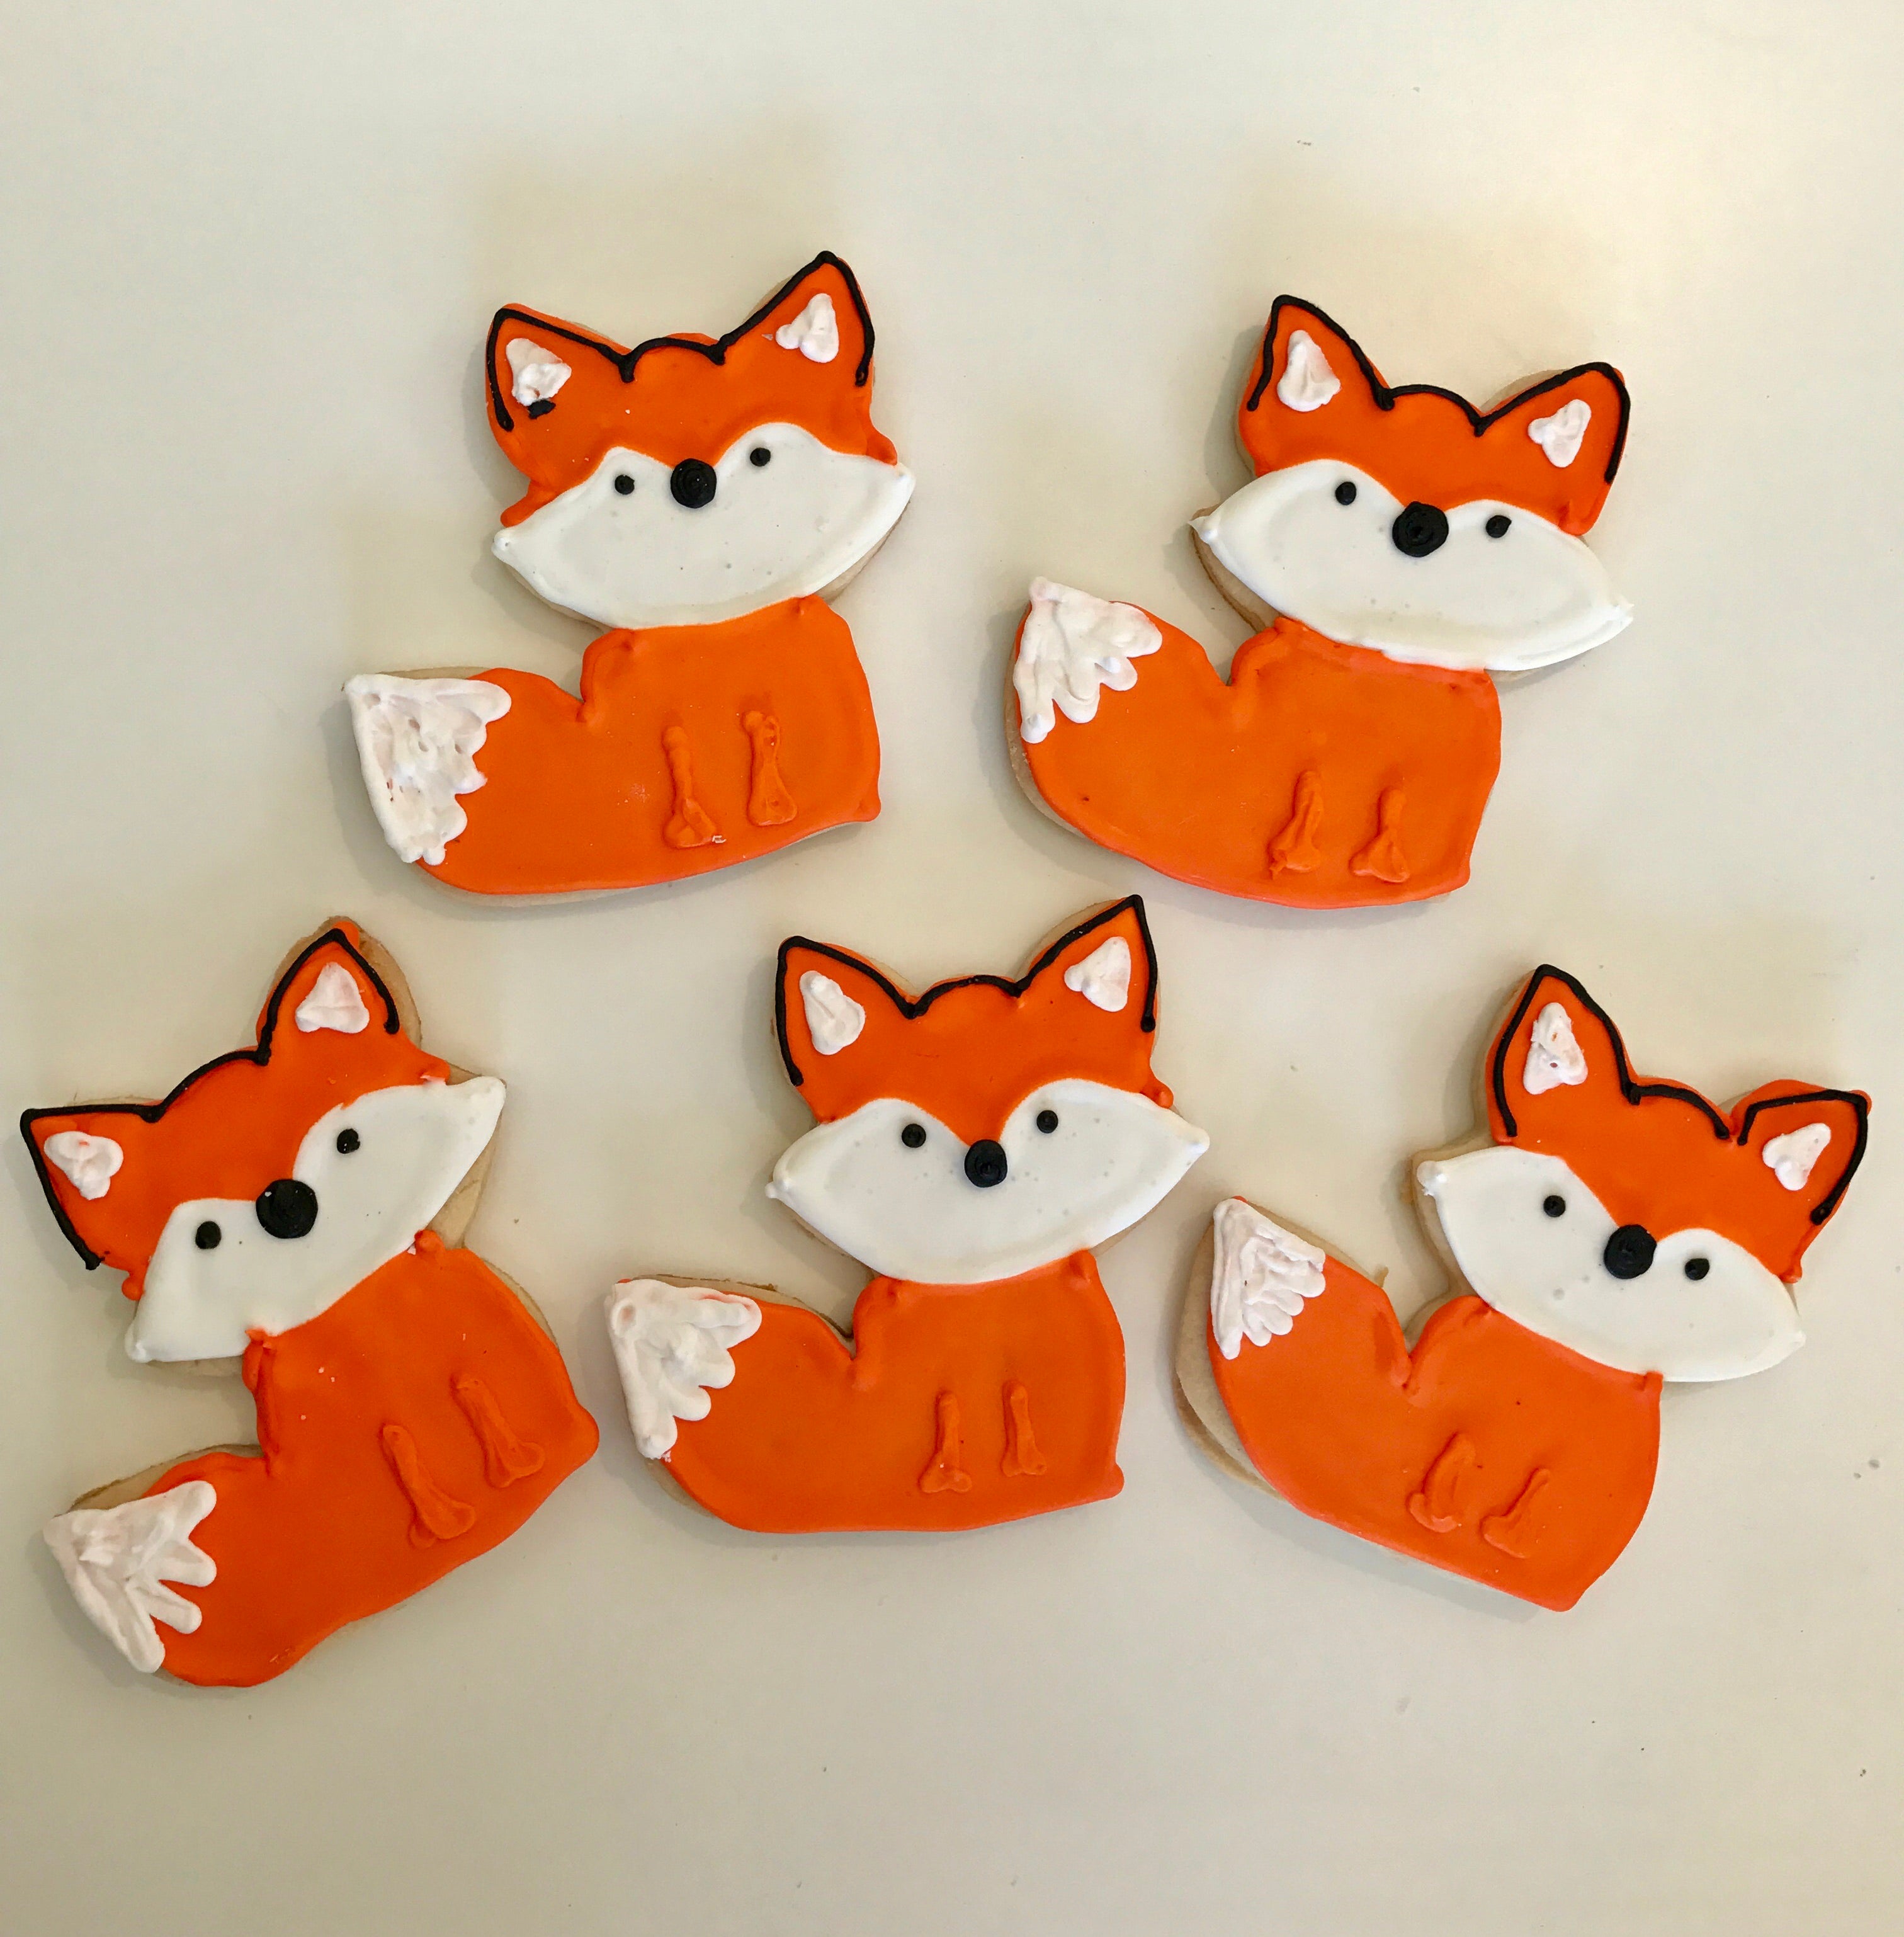 COOKIE FAVORS ANIMALS/FOXES